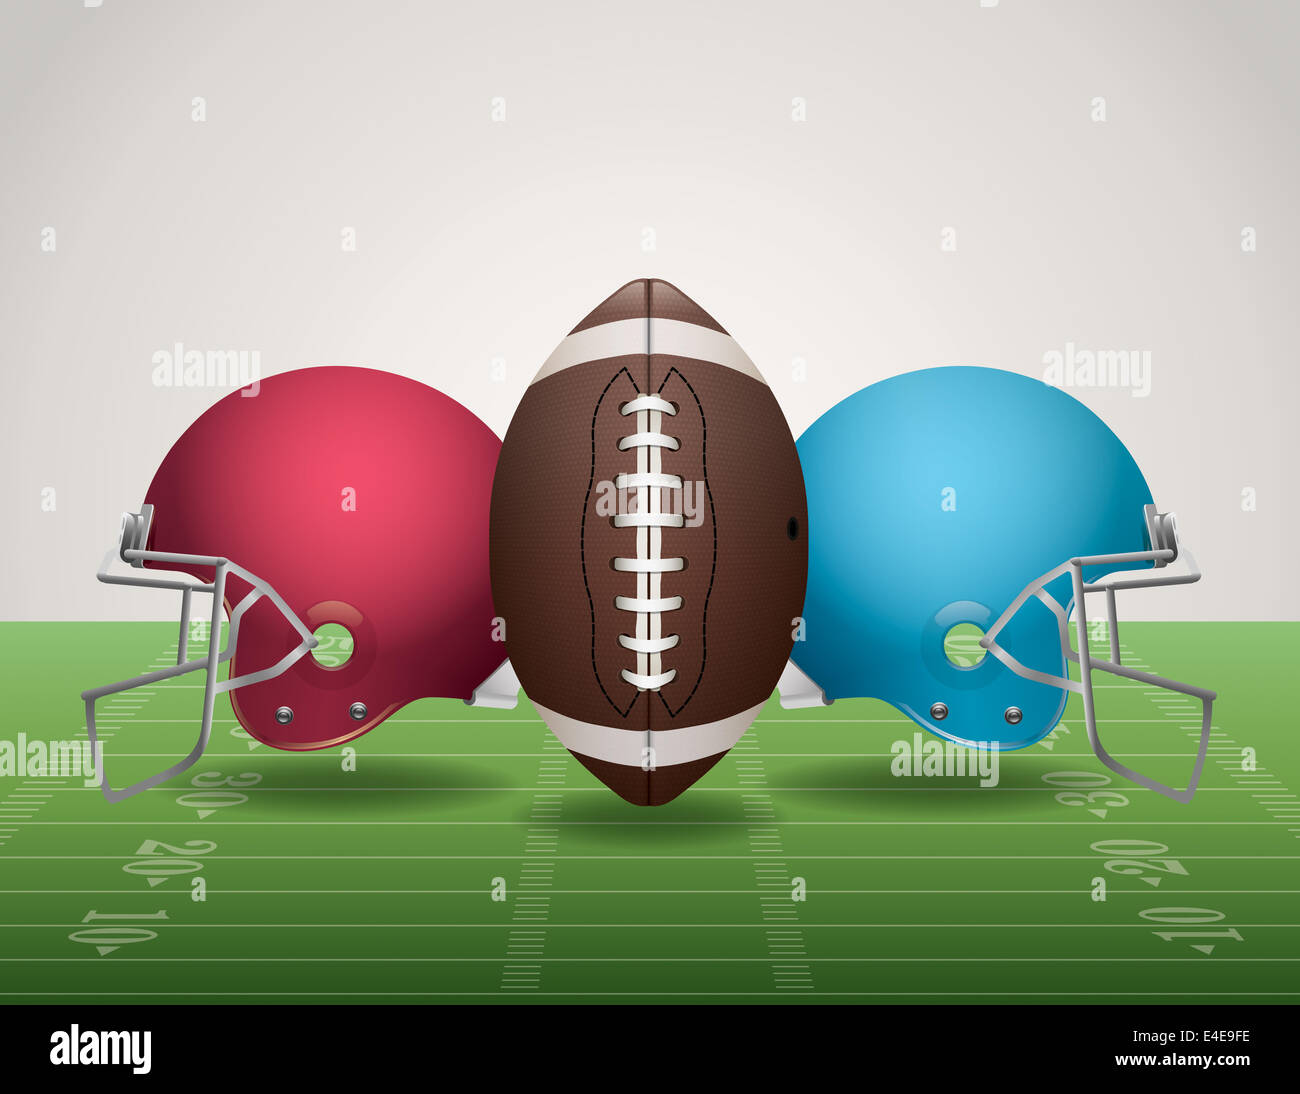 An illustration of an American Football field, football, and helmets. Stock Photo